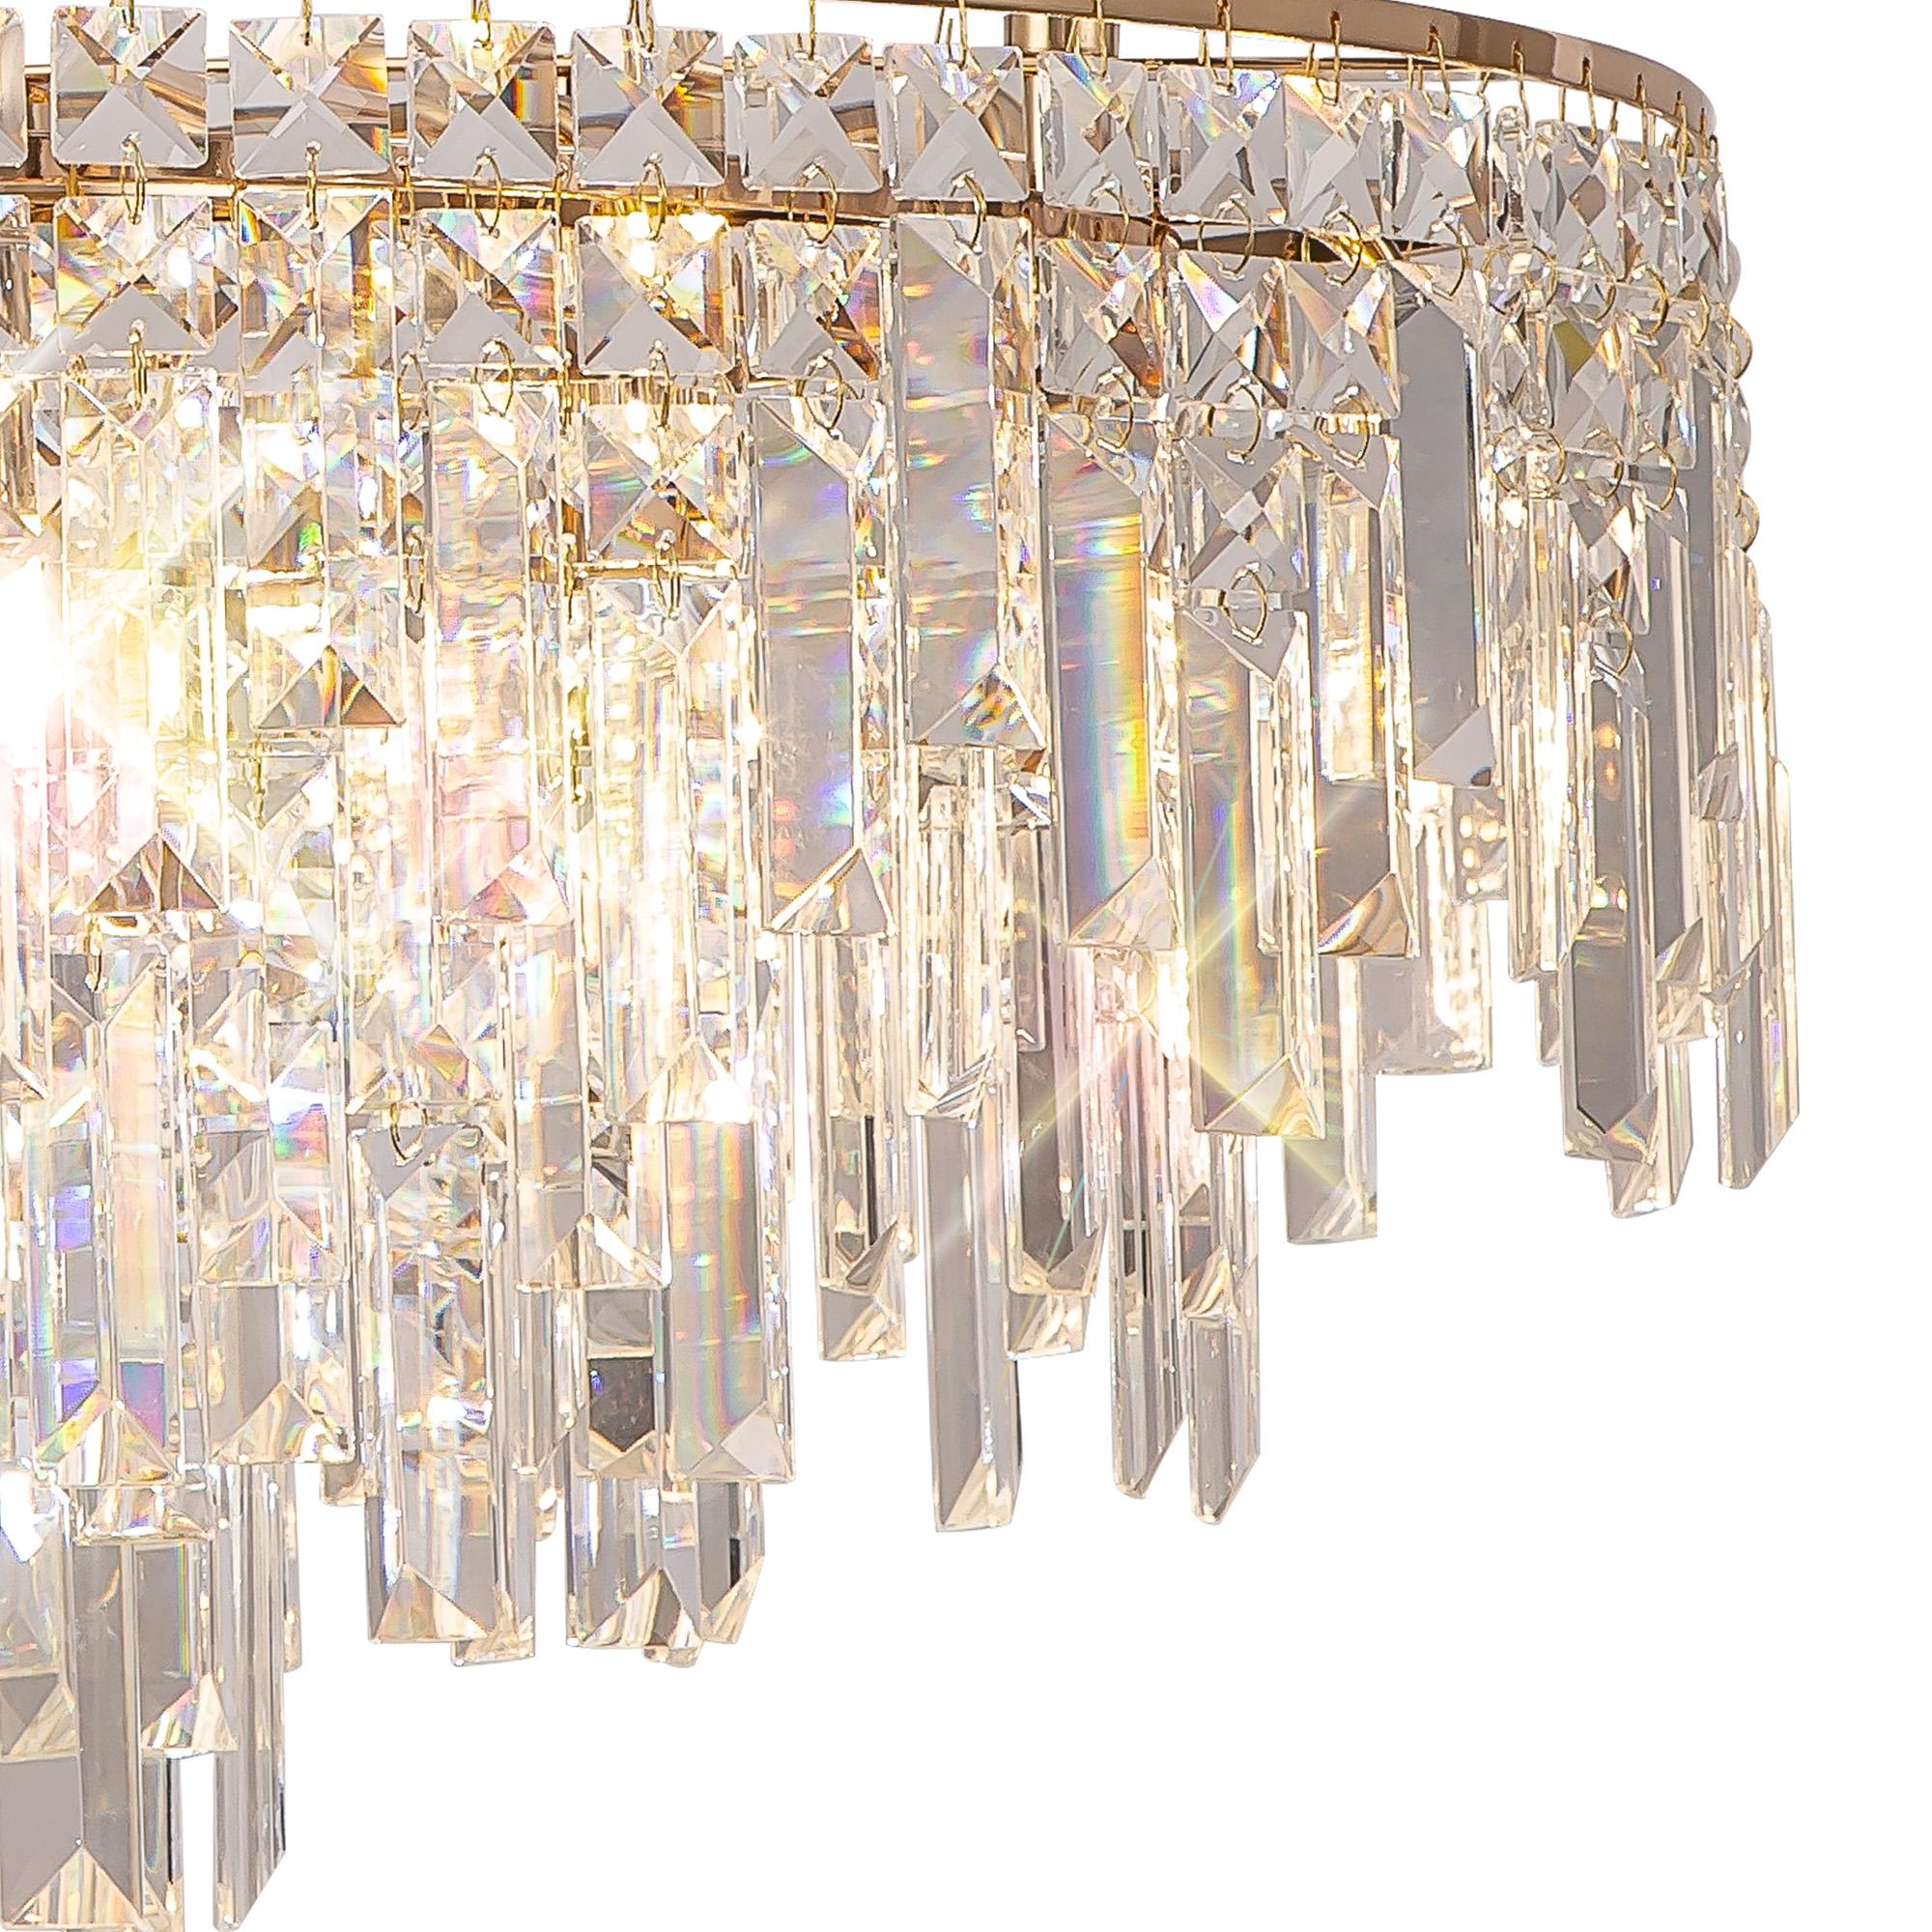 IL31816  Maddison Crystal Pendant 8 Light French Gold